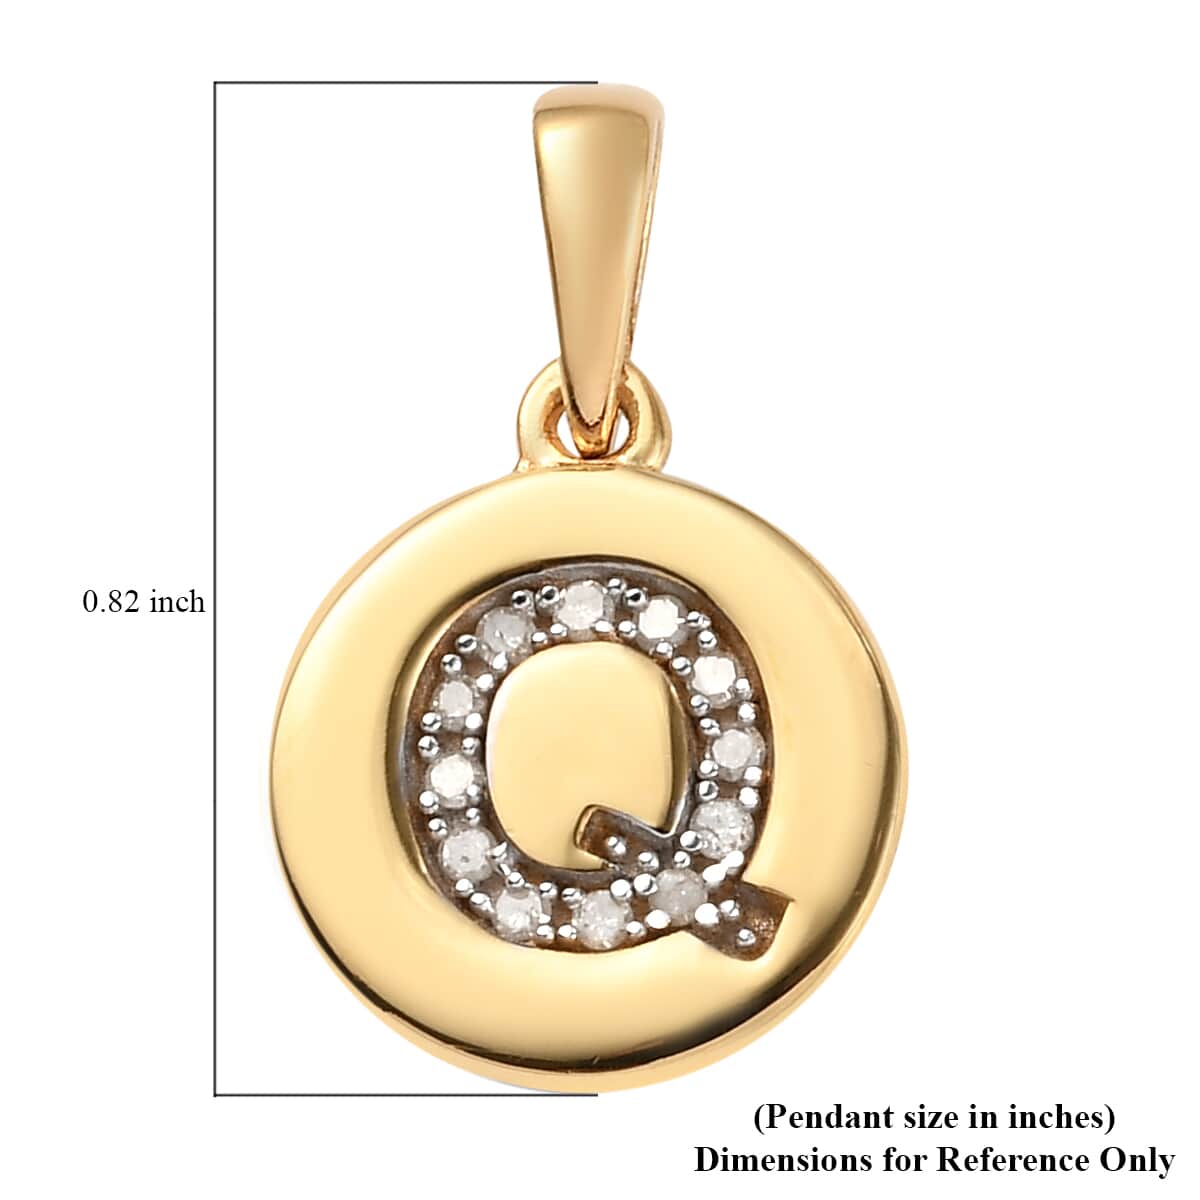 Lolos Exclusive Pick's Diamond Initial Q Pendant in 14K Yellow Gold Over Sterling Silver 0.07 ctw image number 5